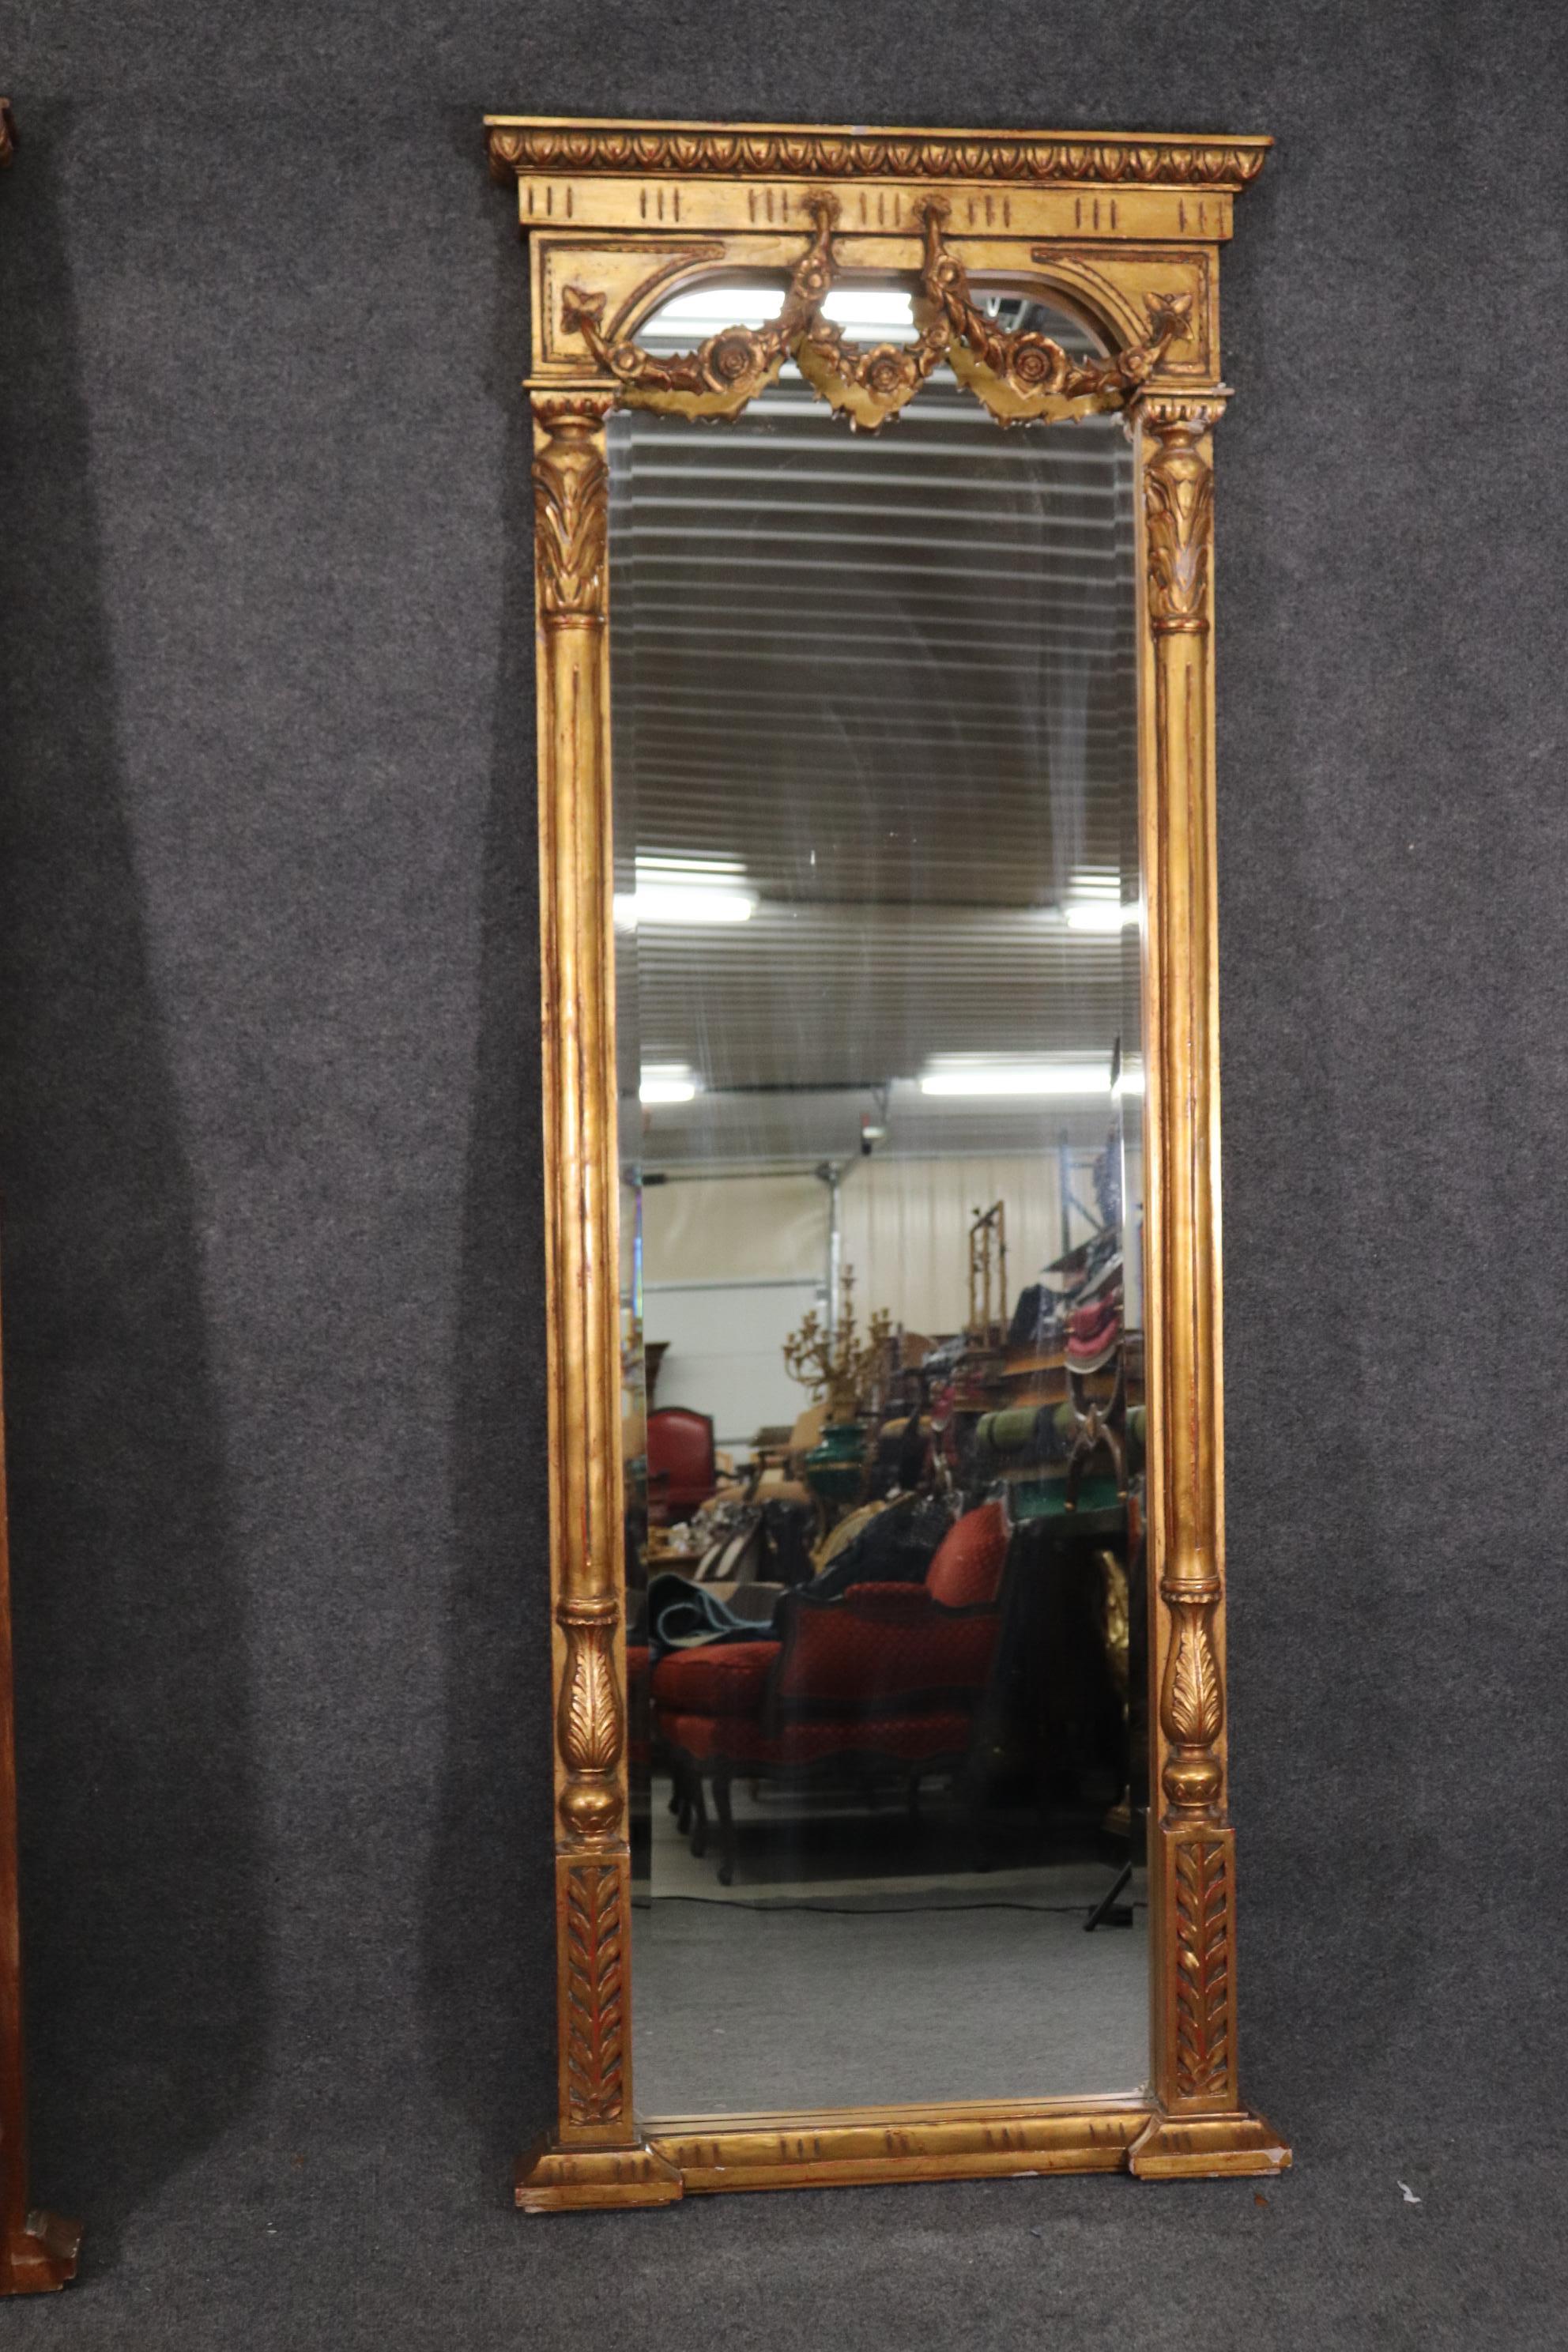 This is a beautiful and rare pair of gold leaf gilded carved Louis XV style pier or hall mirrors. They each measure 84 inches tall x 31.34 wide x 4 inches deep. They are in good condition and have beveled glass mirrors.